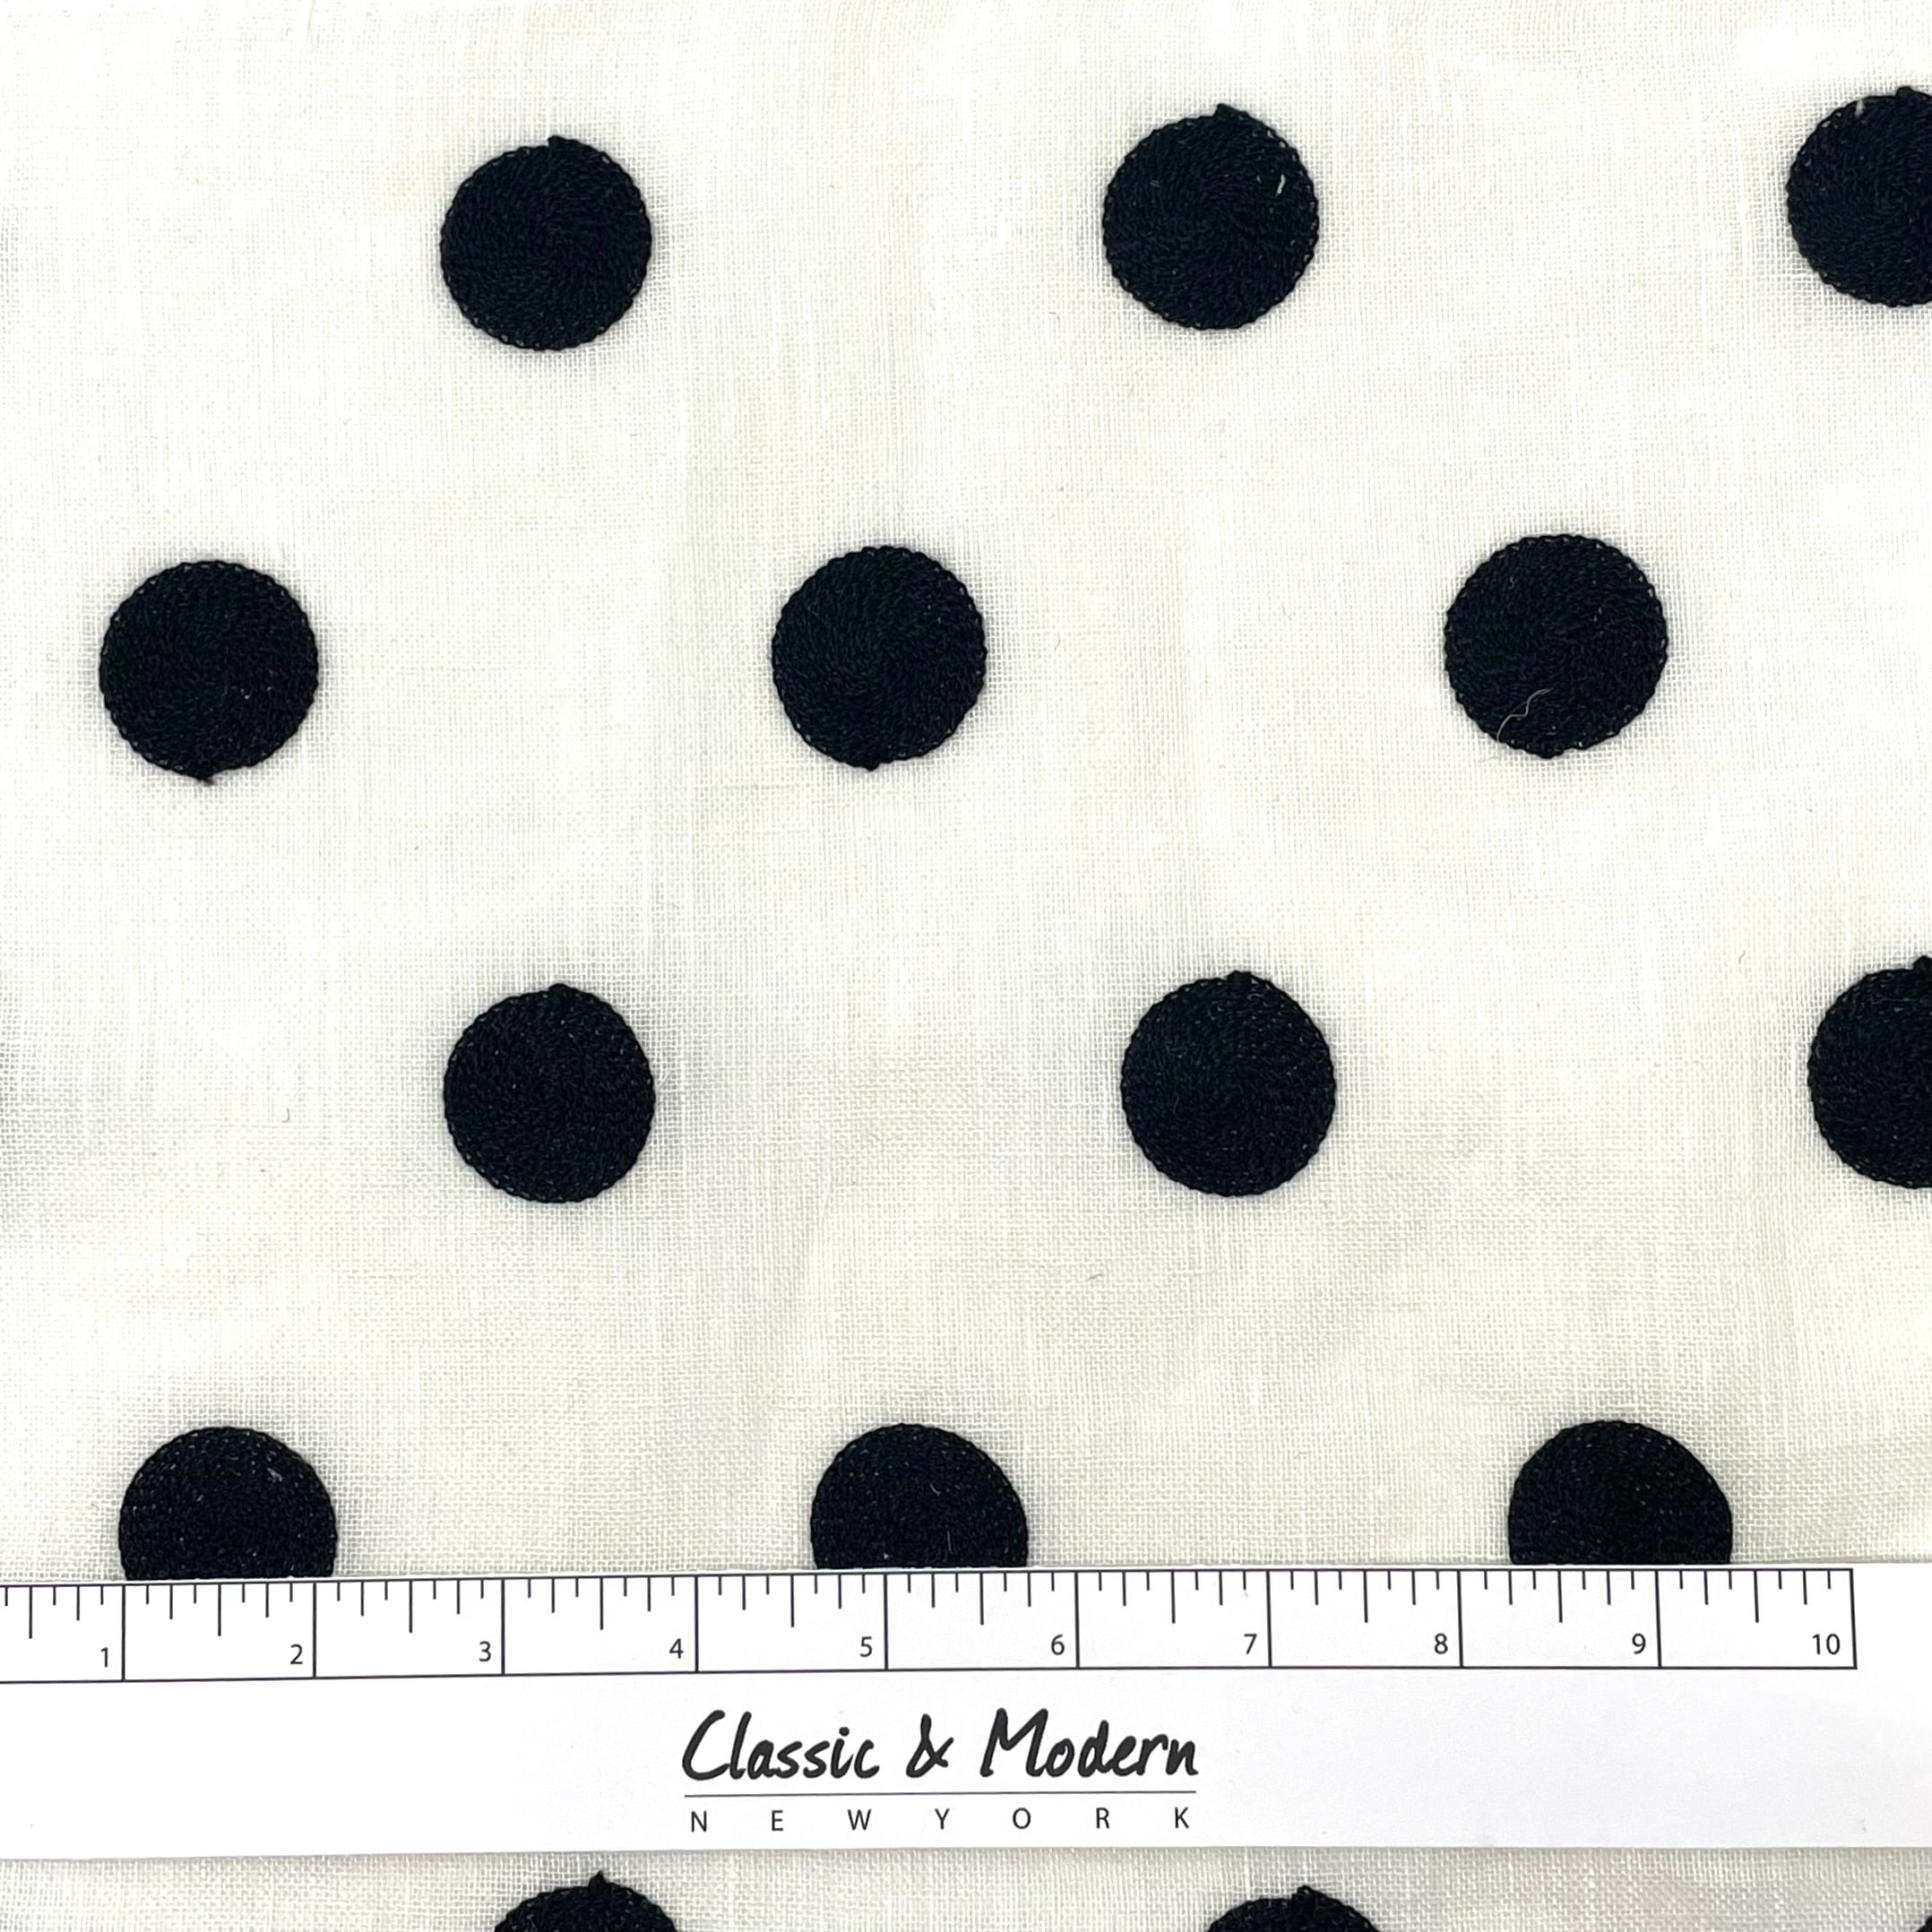 Circle Embroidery Blend Linen Fabric By The Yard, Curtain, Drapery, Table Top, 54" Width/CL1072